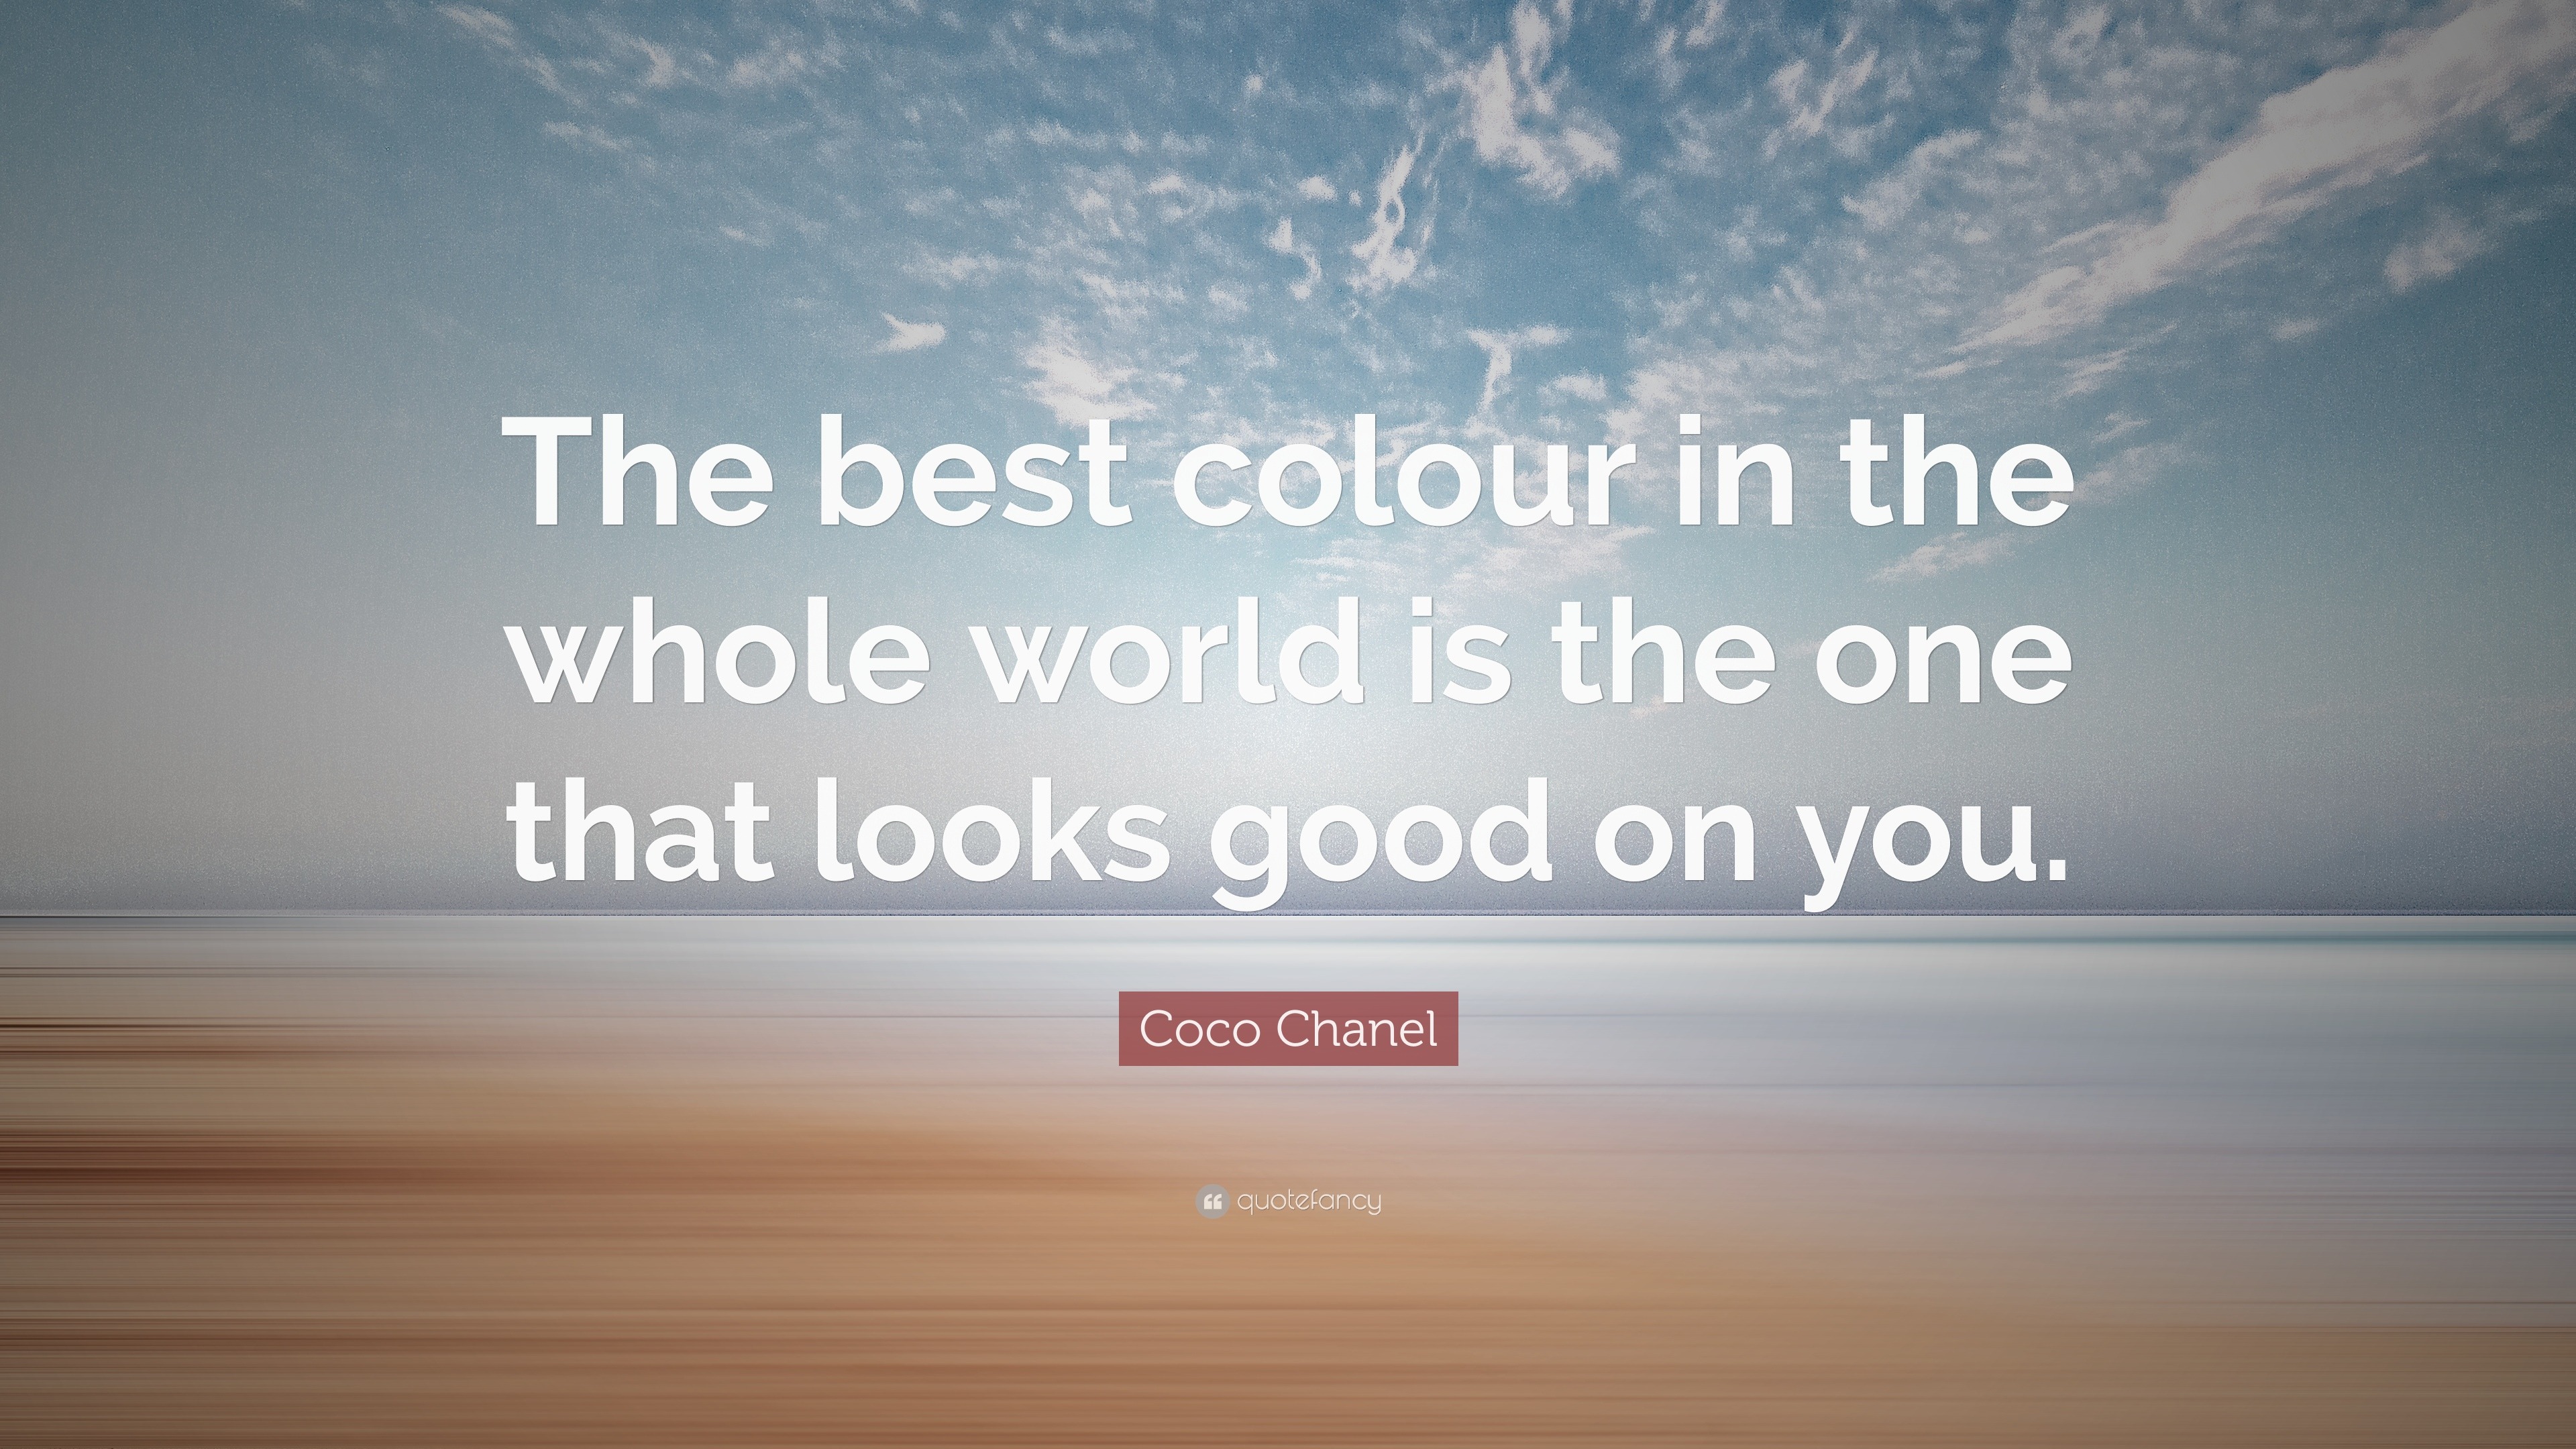 Coco Chanel Quote: “The best colour in the whole world is the one